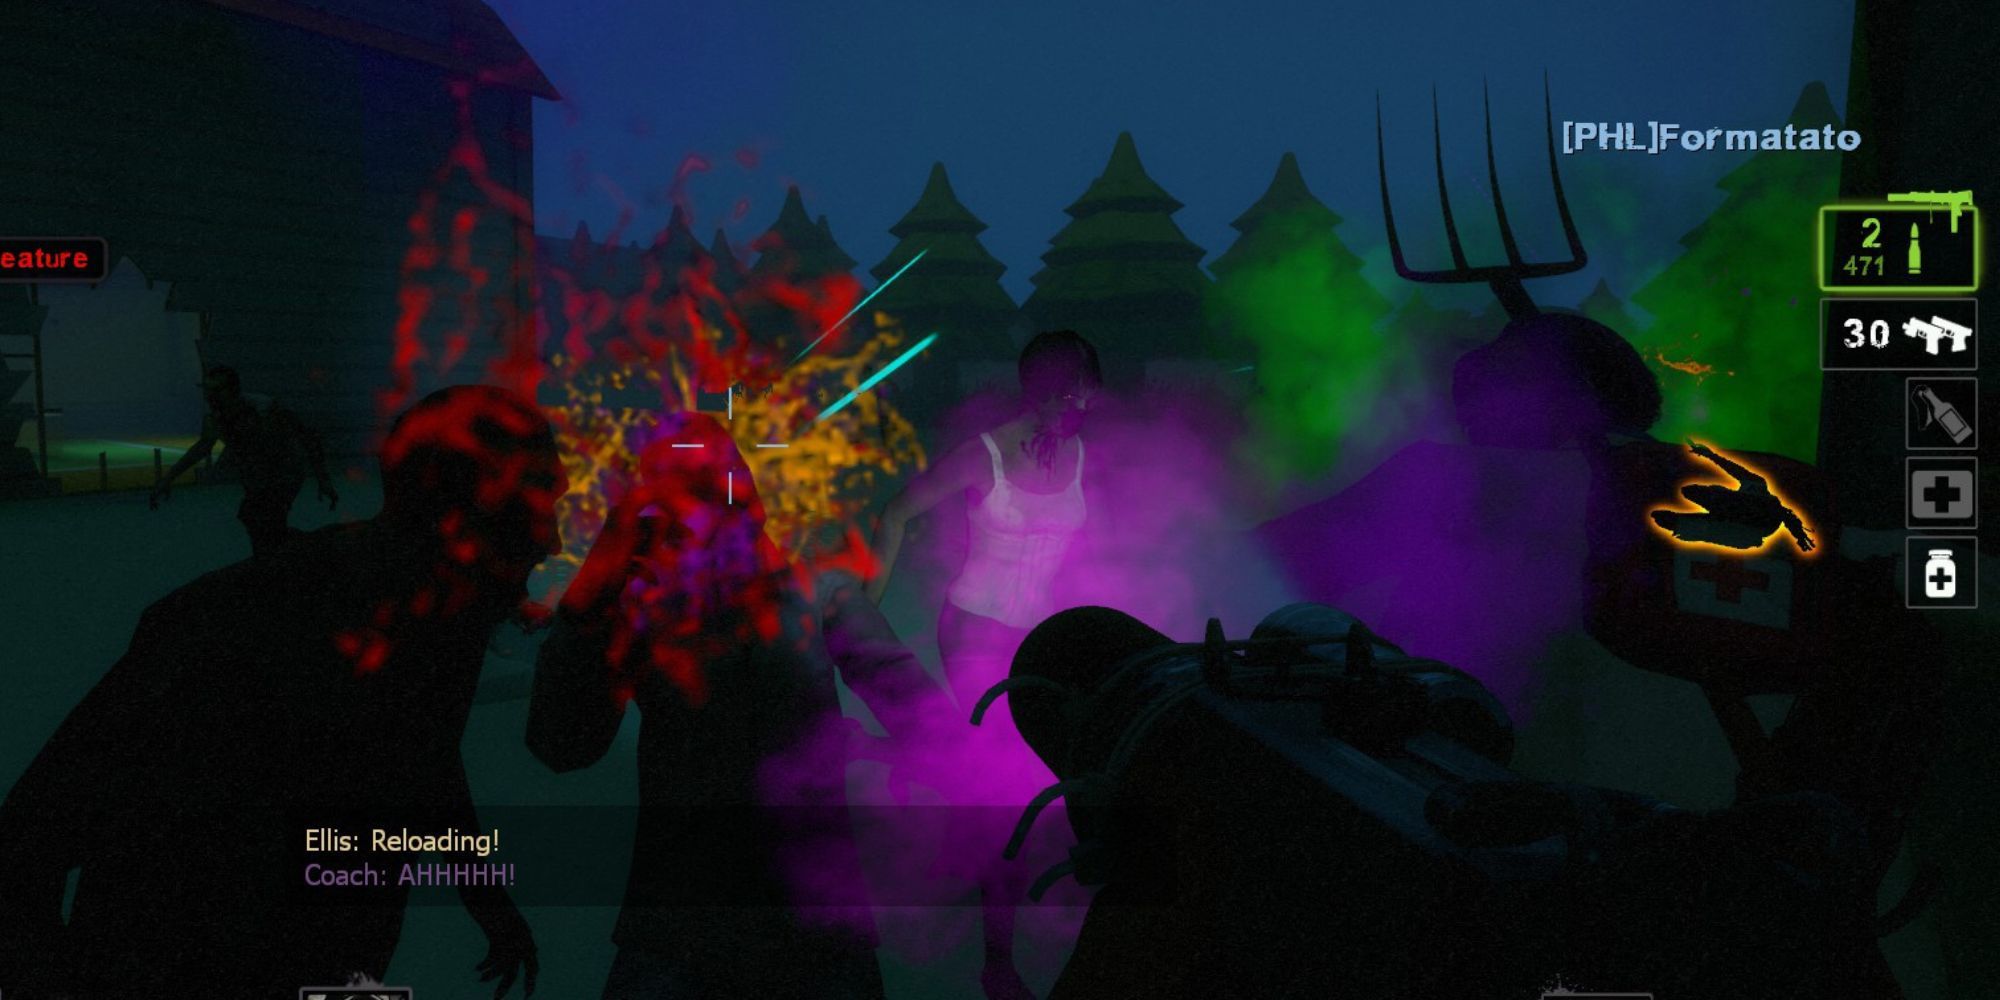 different colors spray into a mist in the air, replacing gunfire and blood spatter